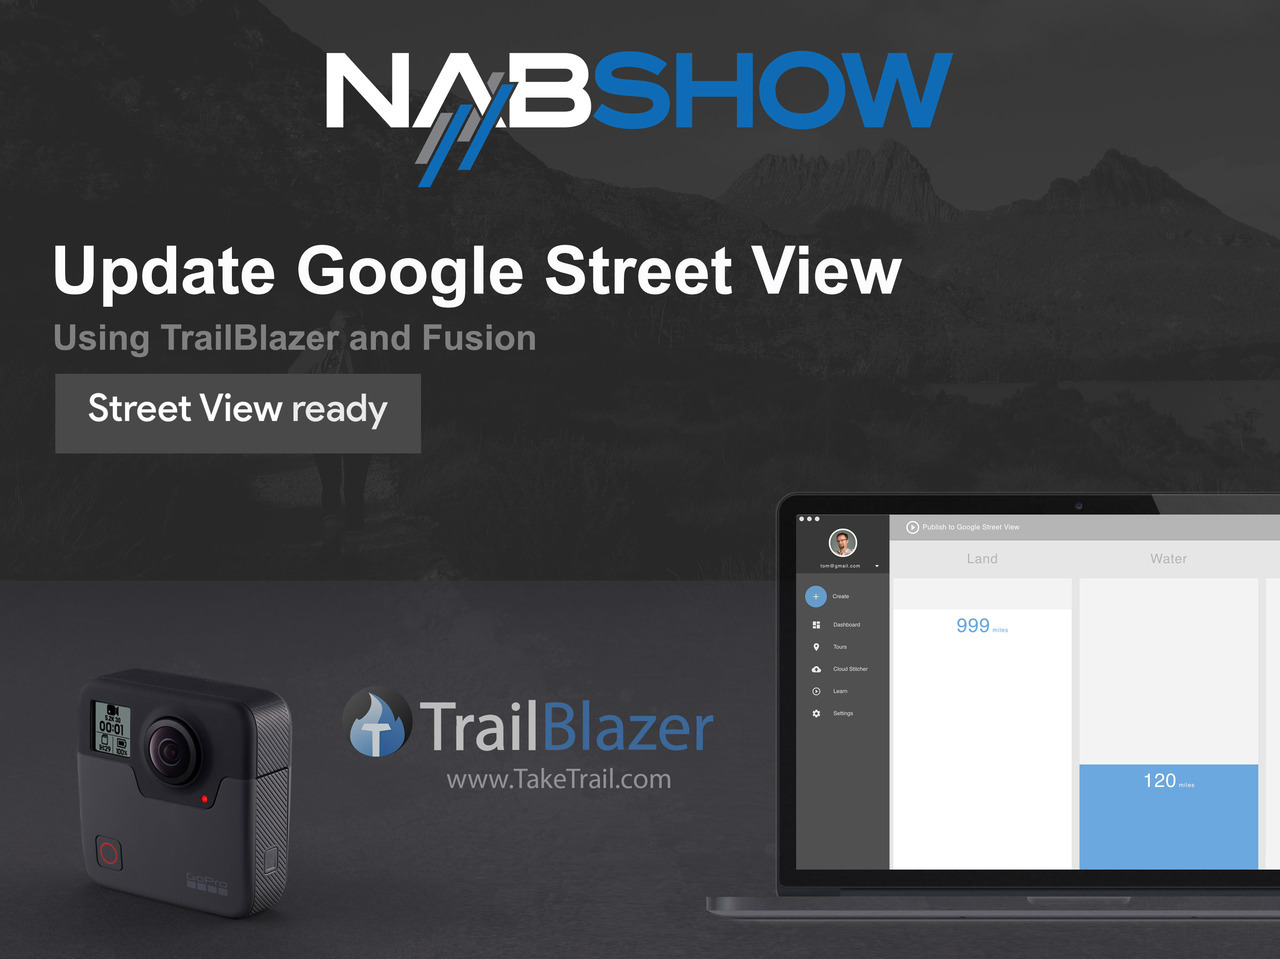 Come visit us at NAB Show from April 8 - 11th at the #LasVegasConvention Center! We will be presenting TrailBlazer with our friends at GoPro. Come find us in their booth, C8008, in the Central Hall. We look forward to seeing you there! #NABSHOW